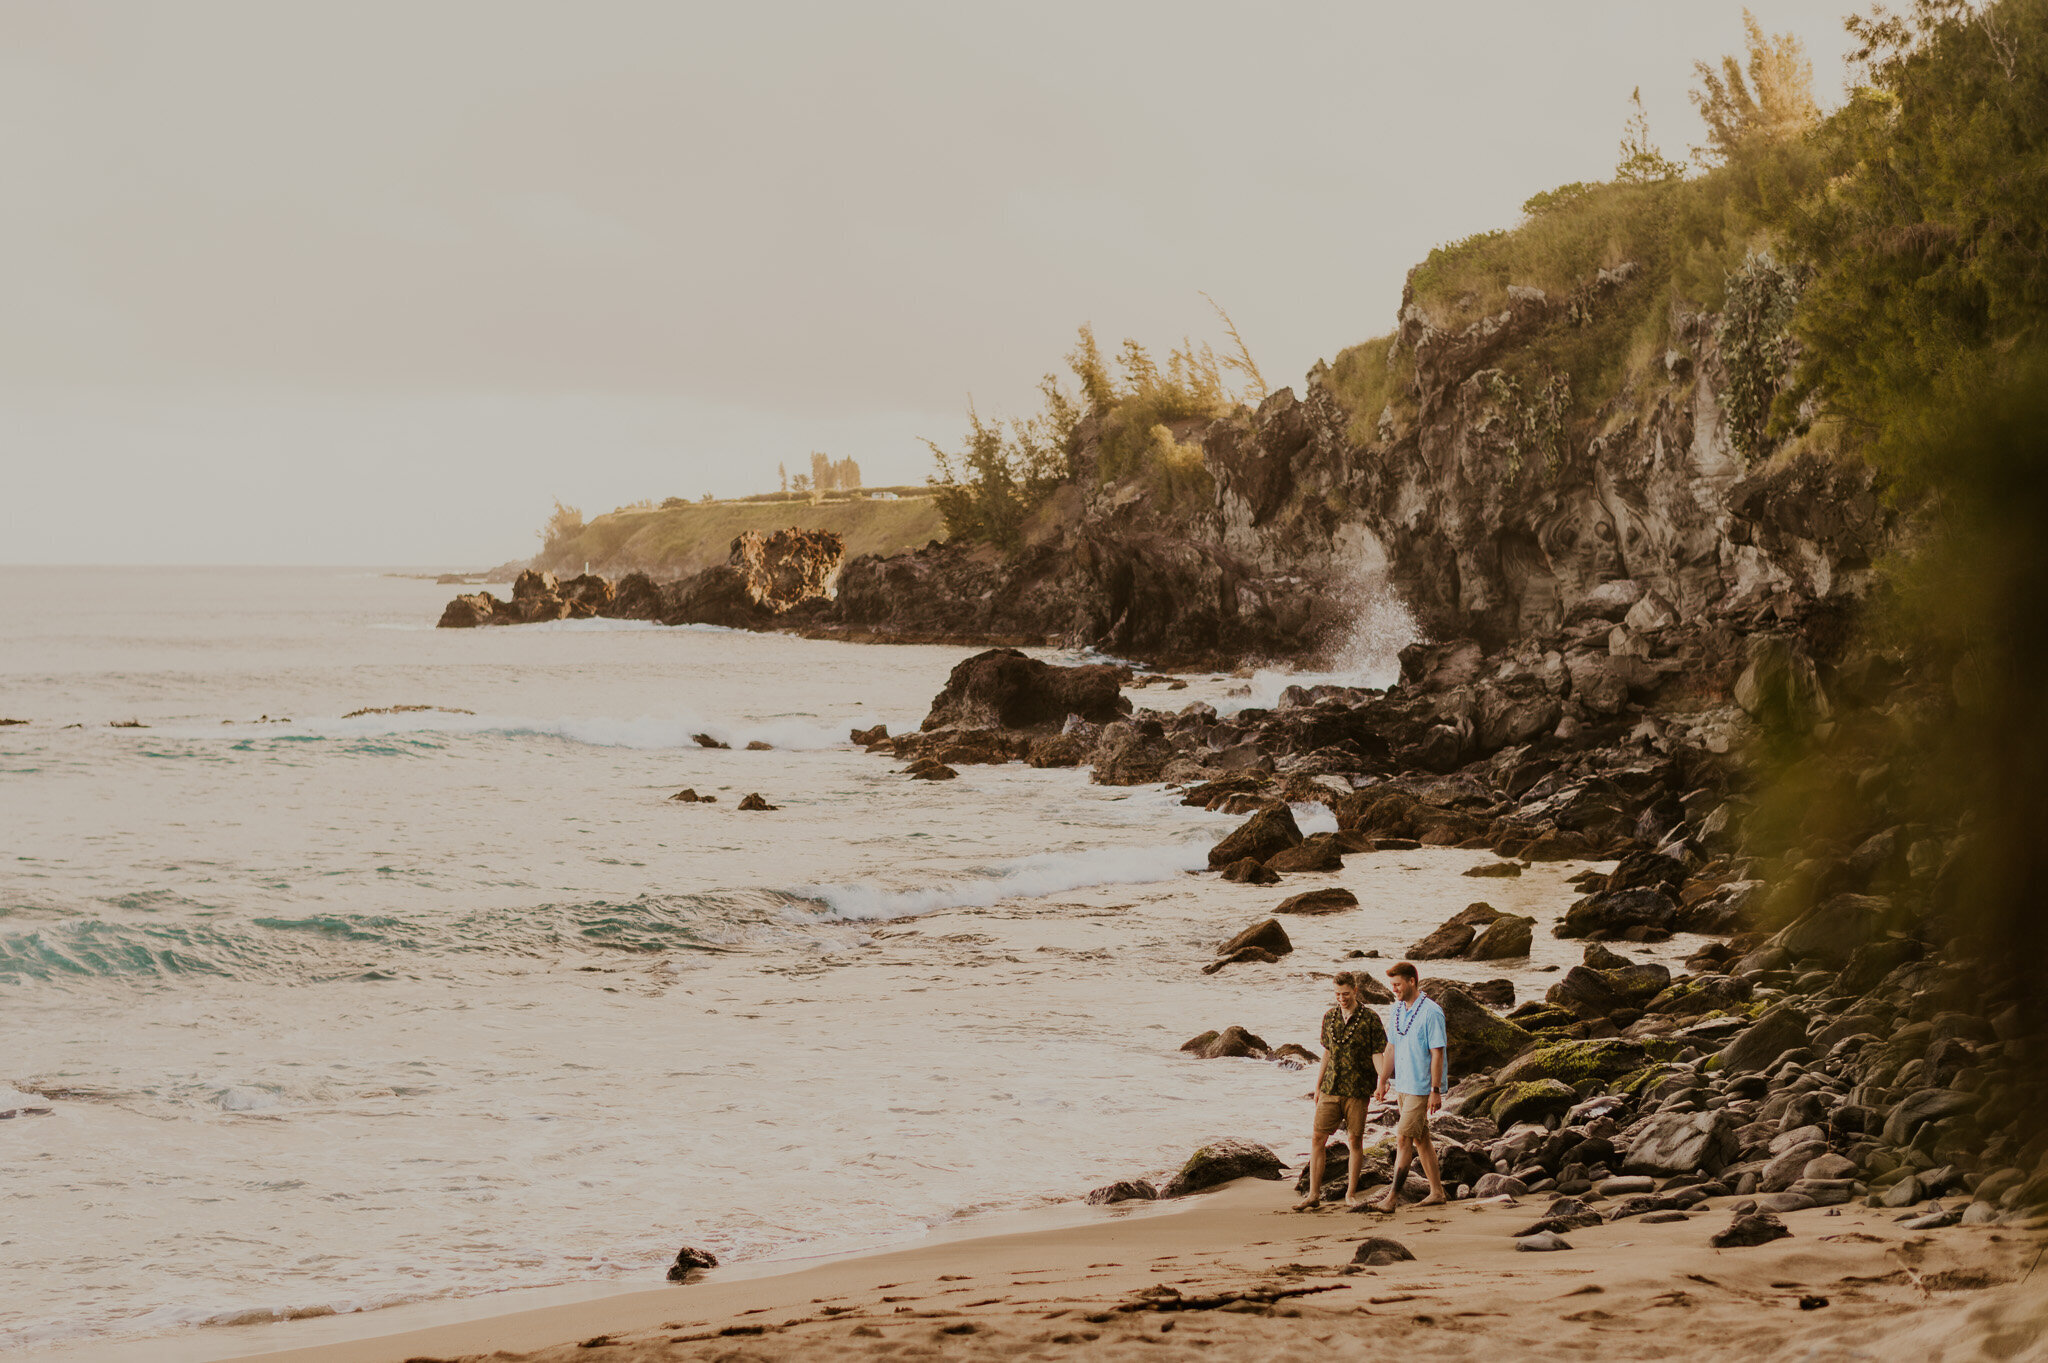 how to elope in hawaii